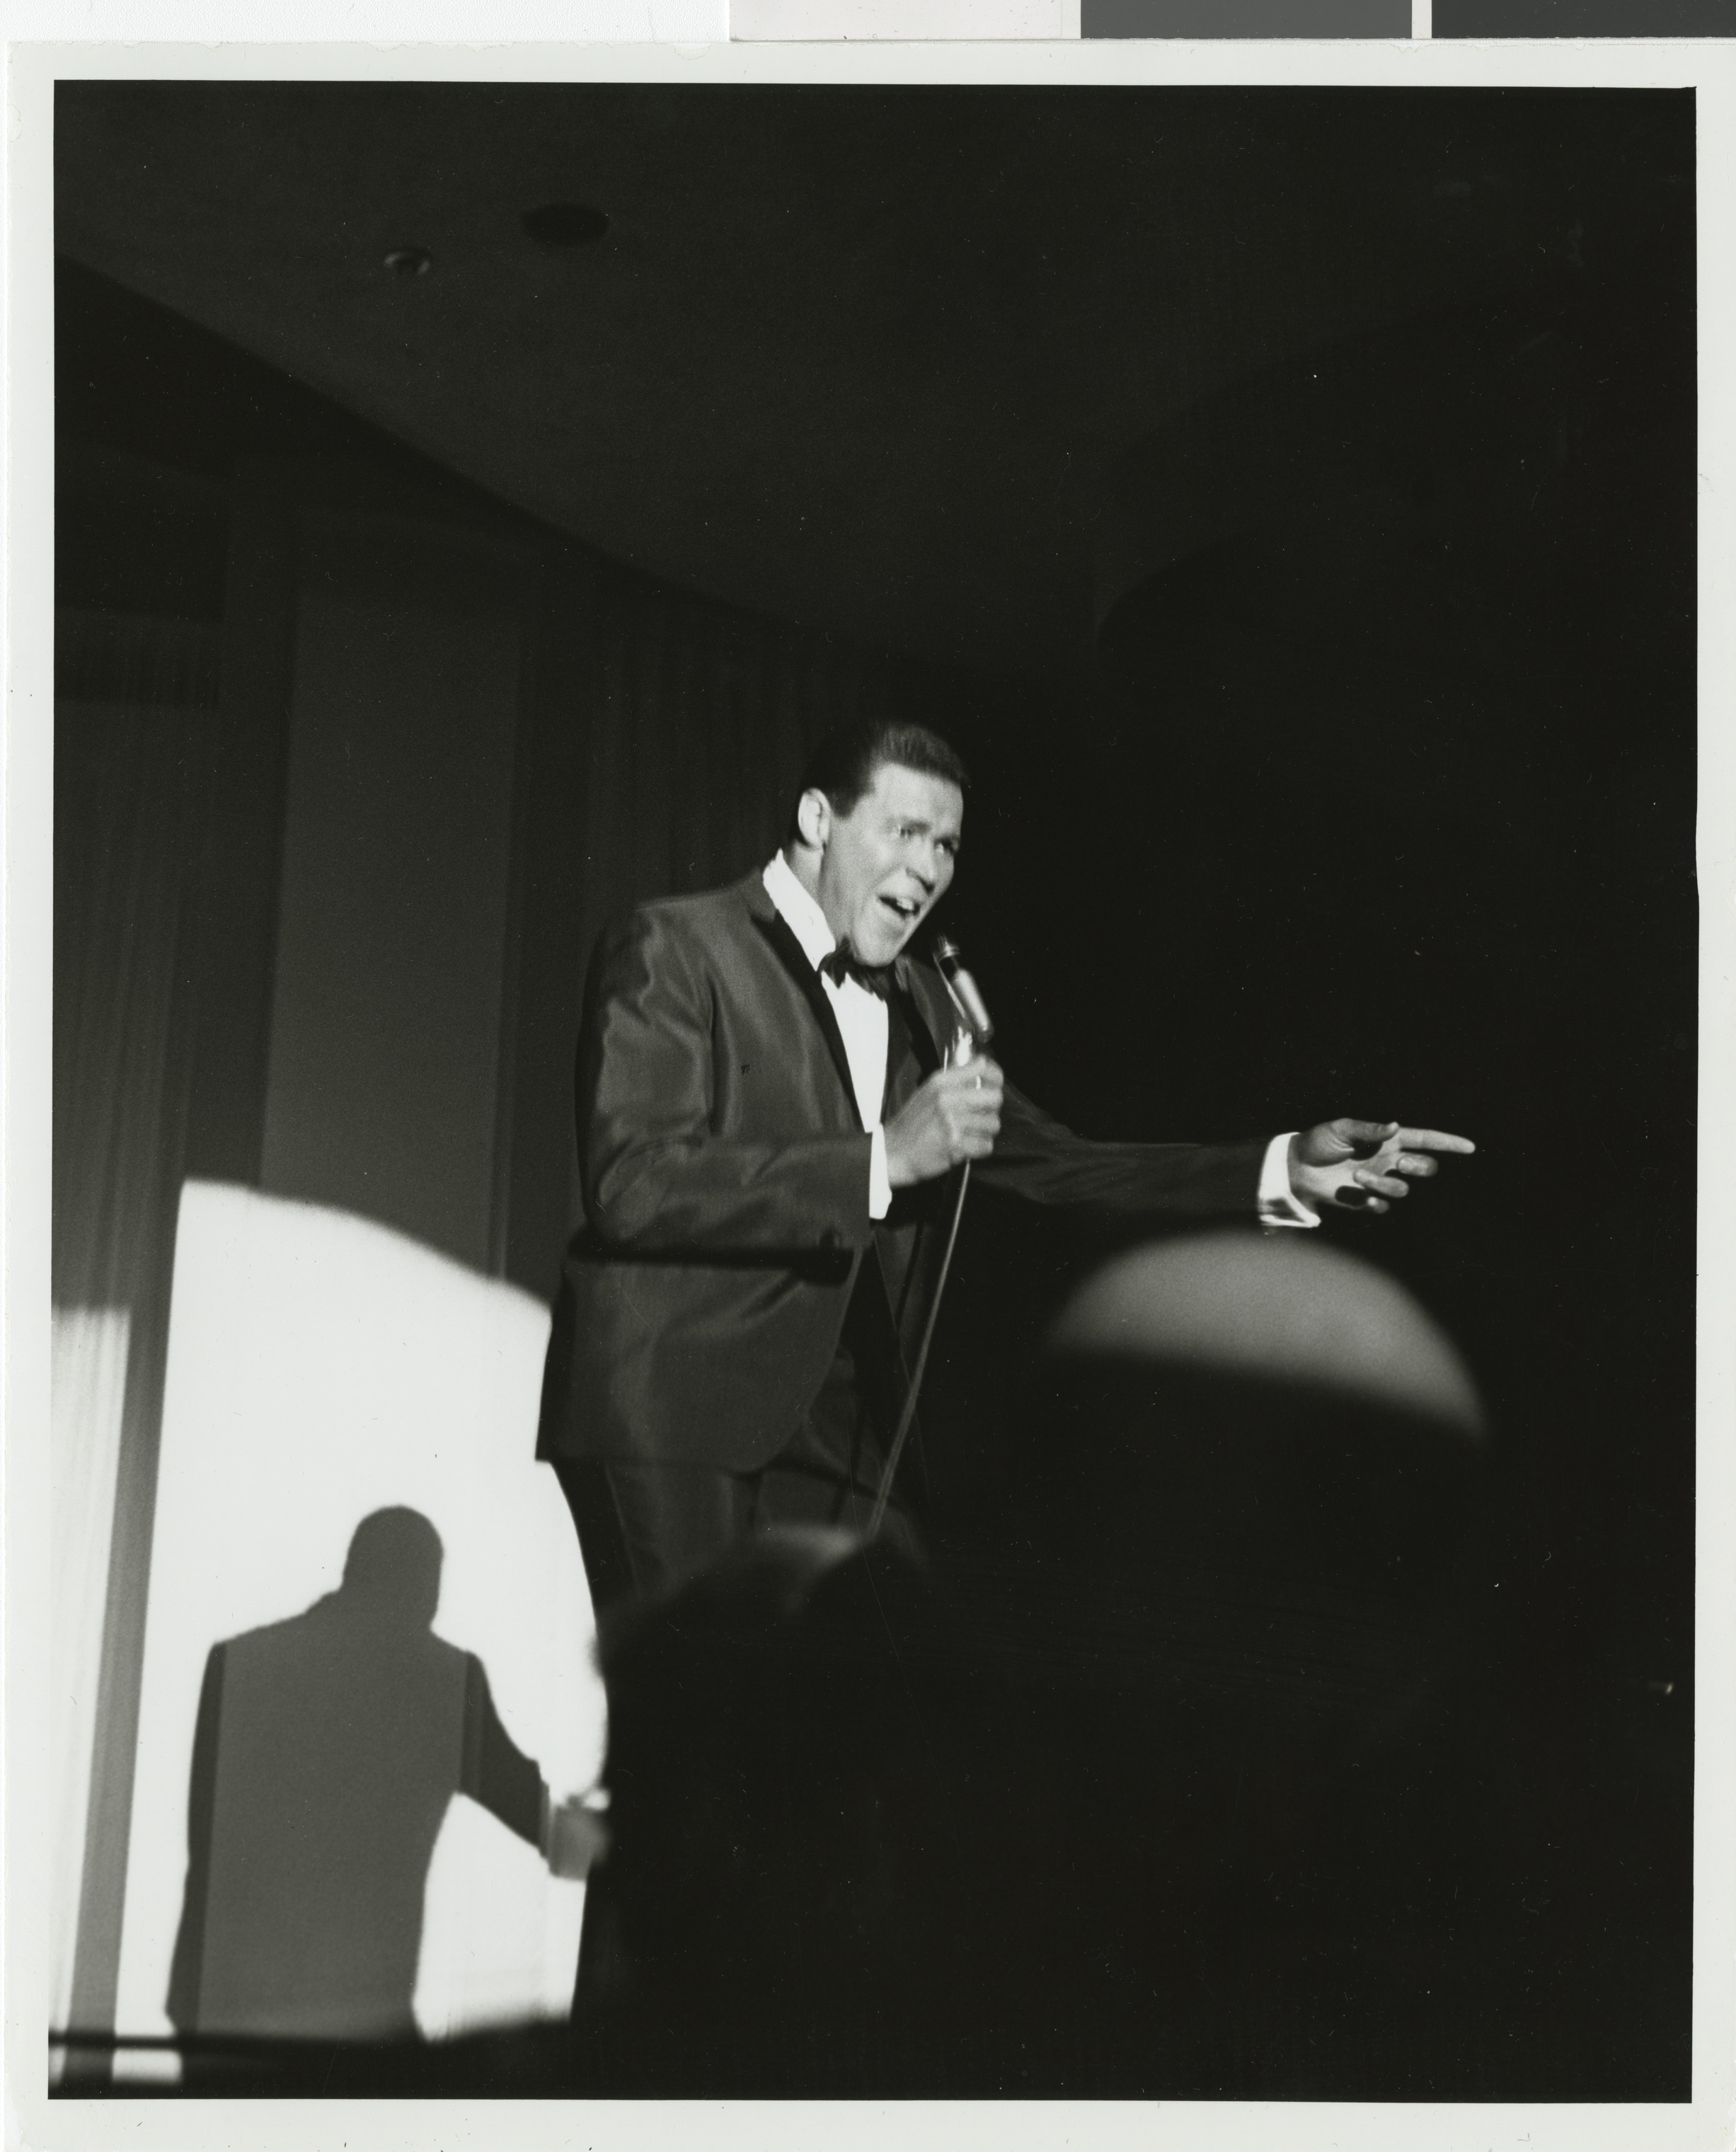 Photograph of Chubby Checker performing onstage at the Sands Hotel, August 1962